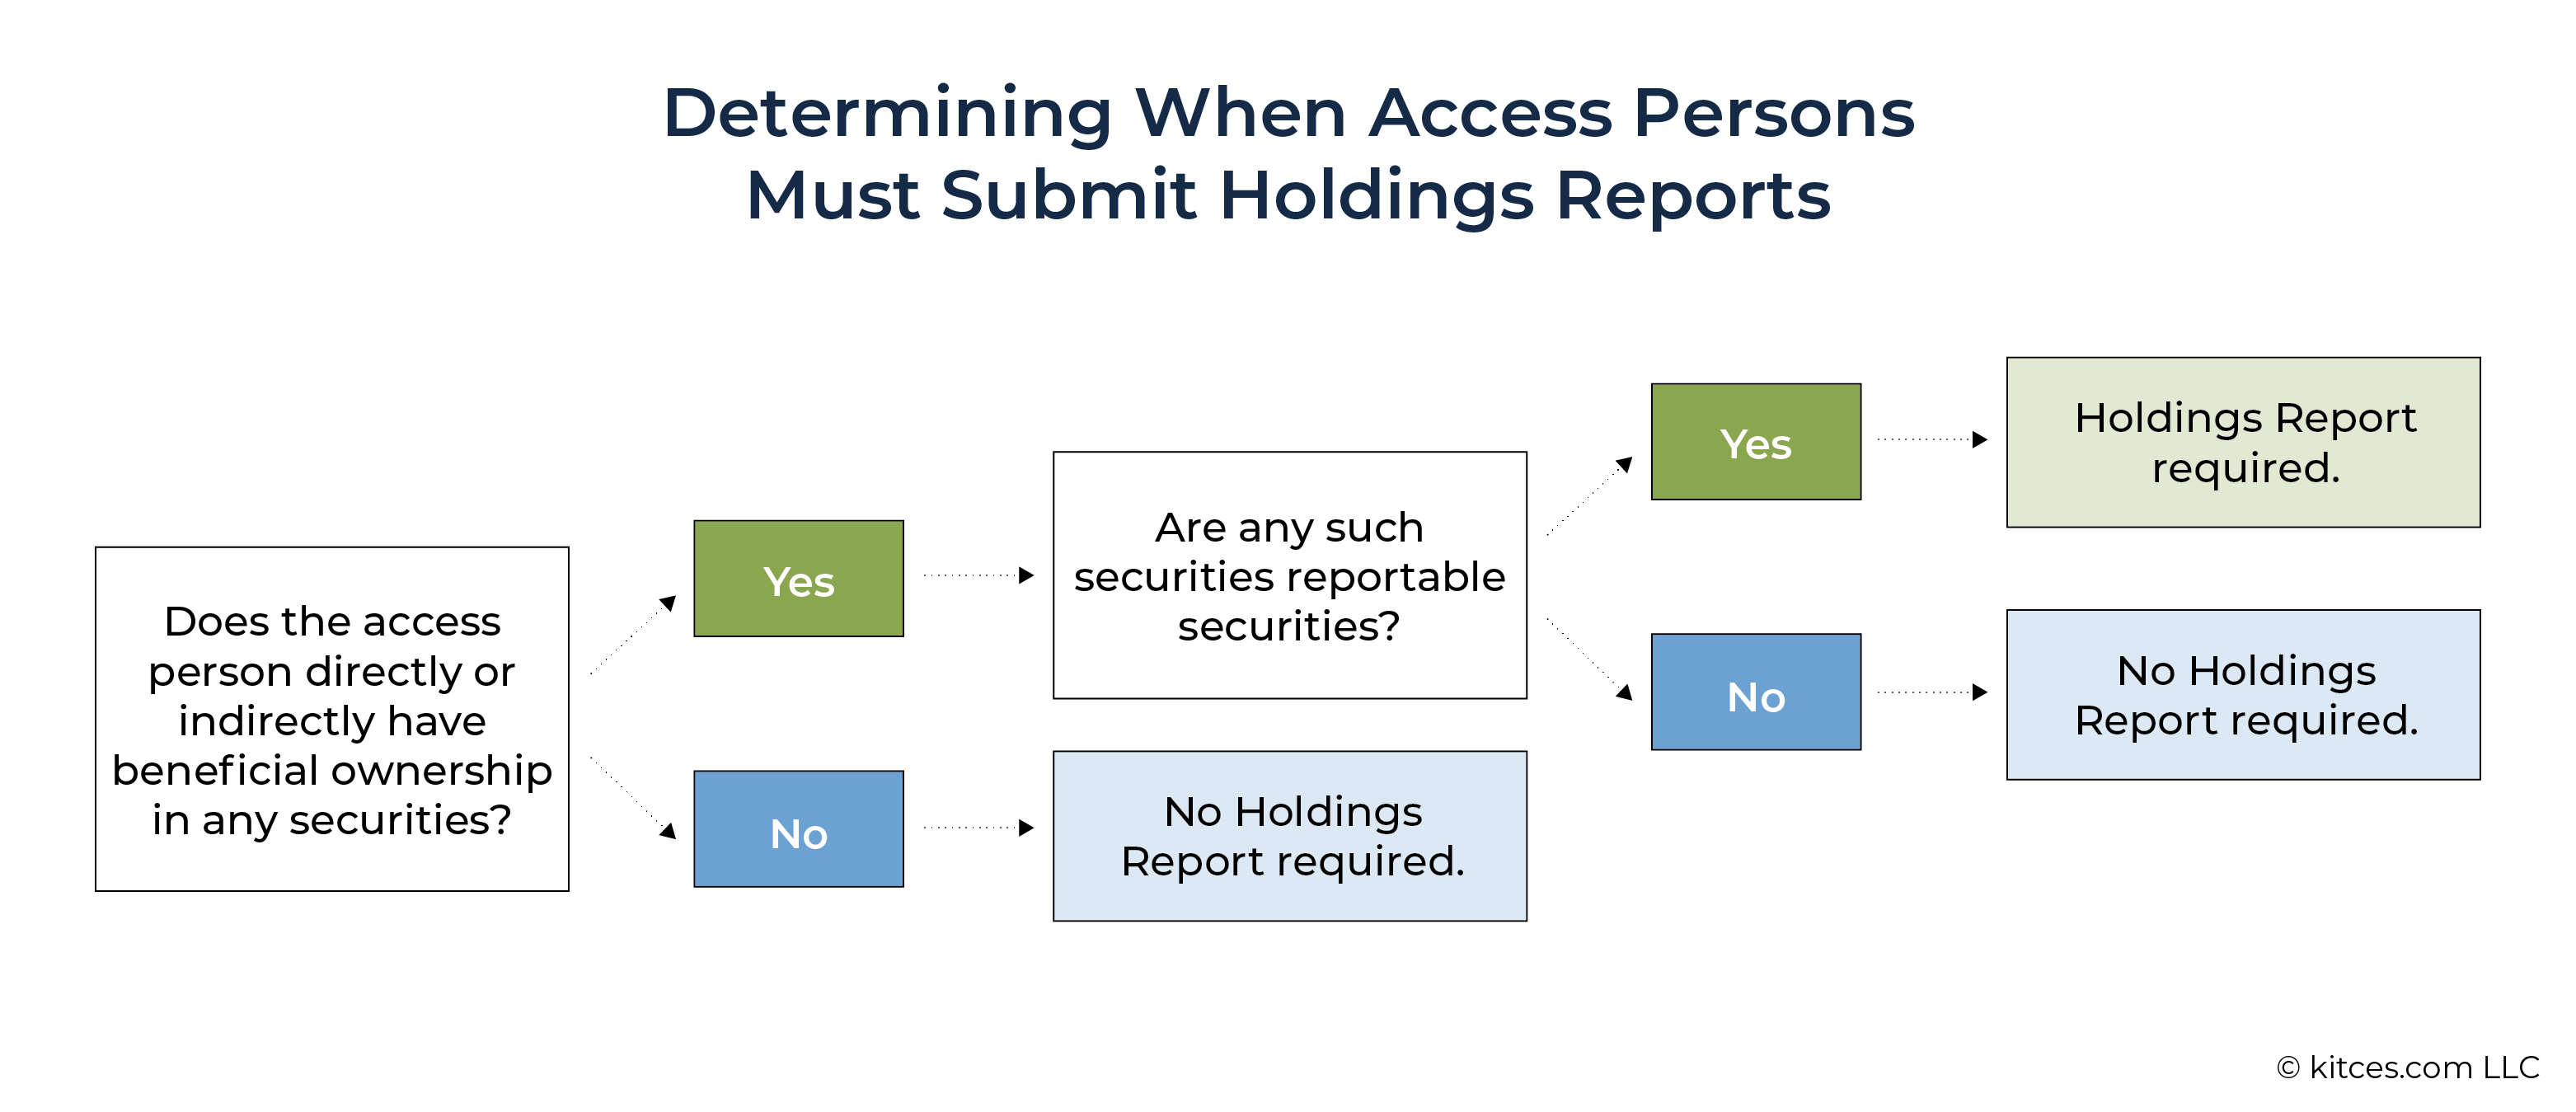 Determining When Access Persons Must Submit Holdings Reports